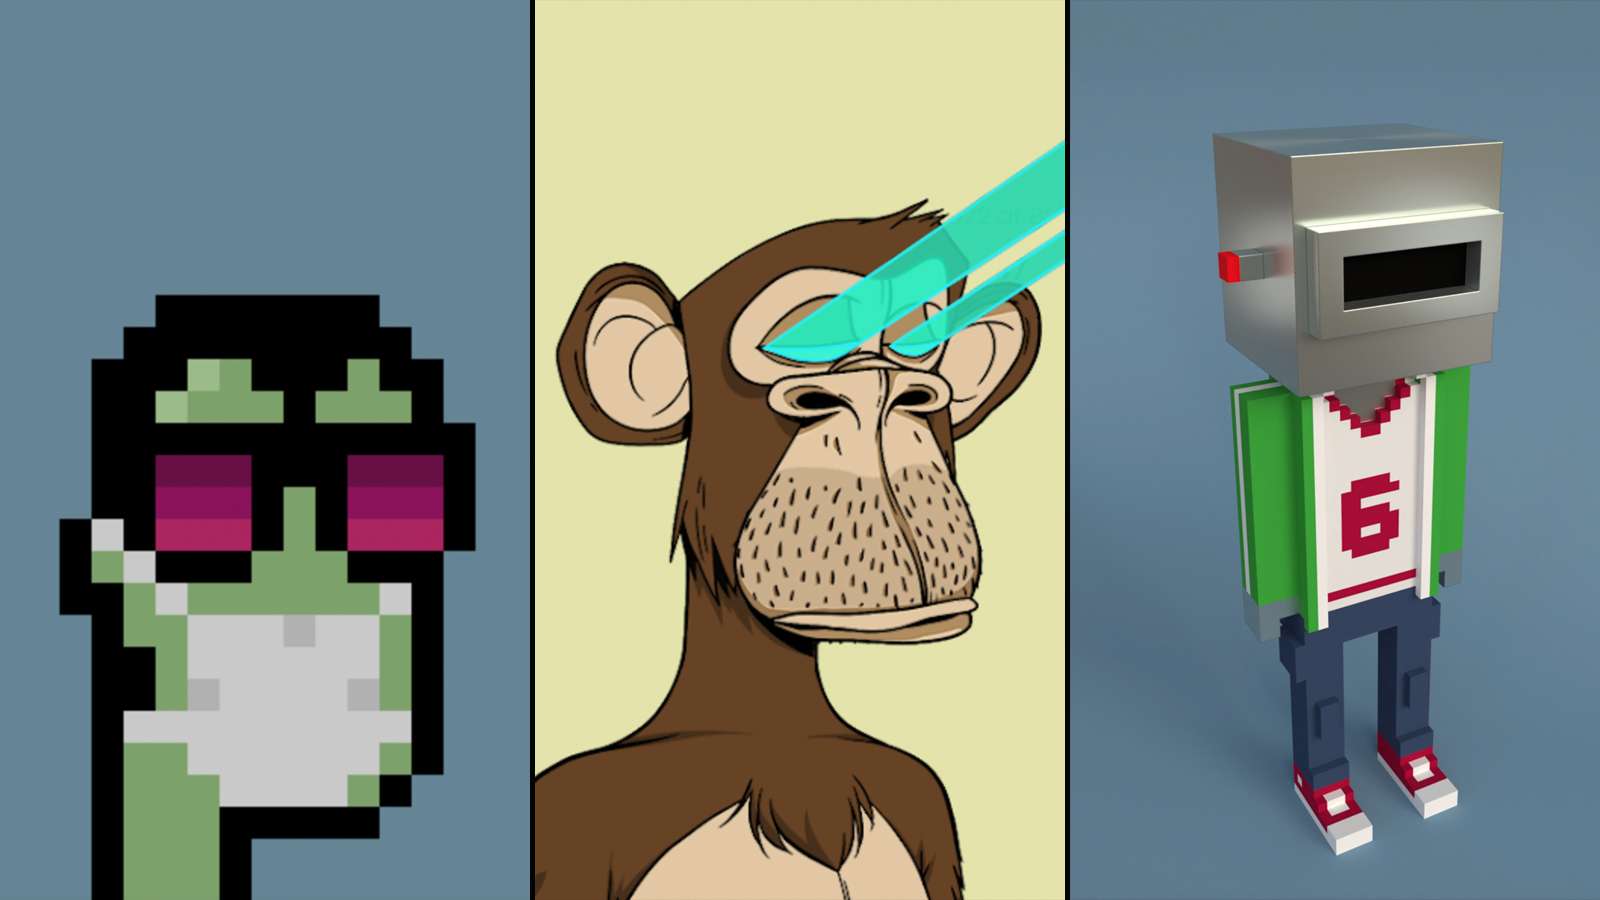 Image showing Cryptopunk and Bored Apes NFT art associated with Cozomo de Medici's Twitter profile.